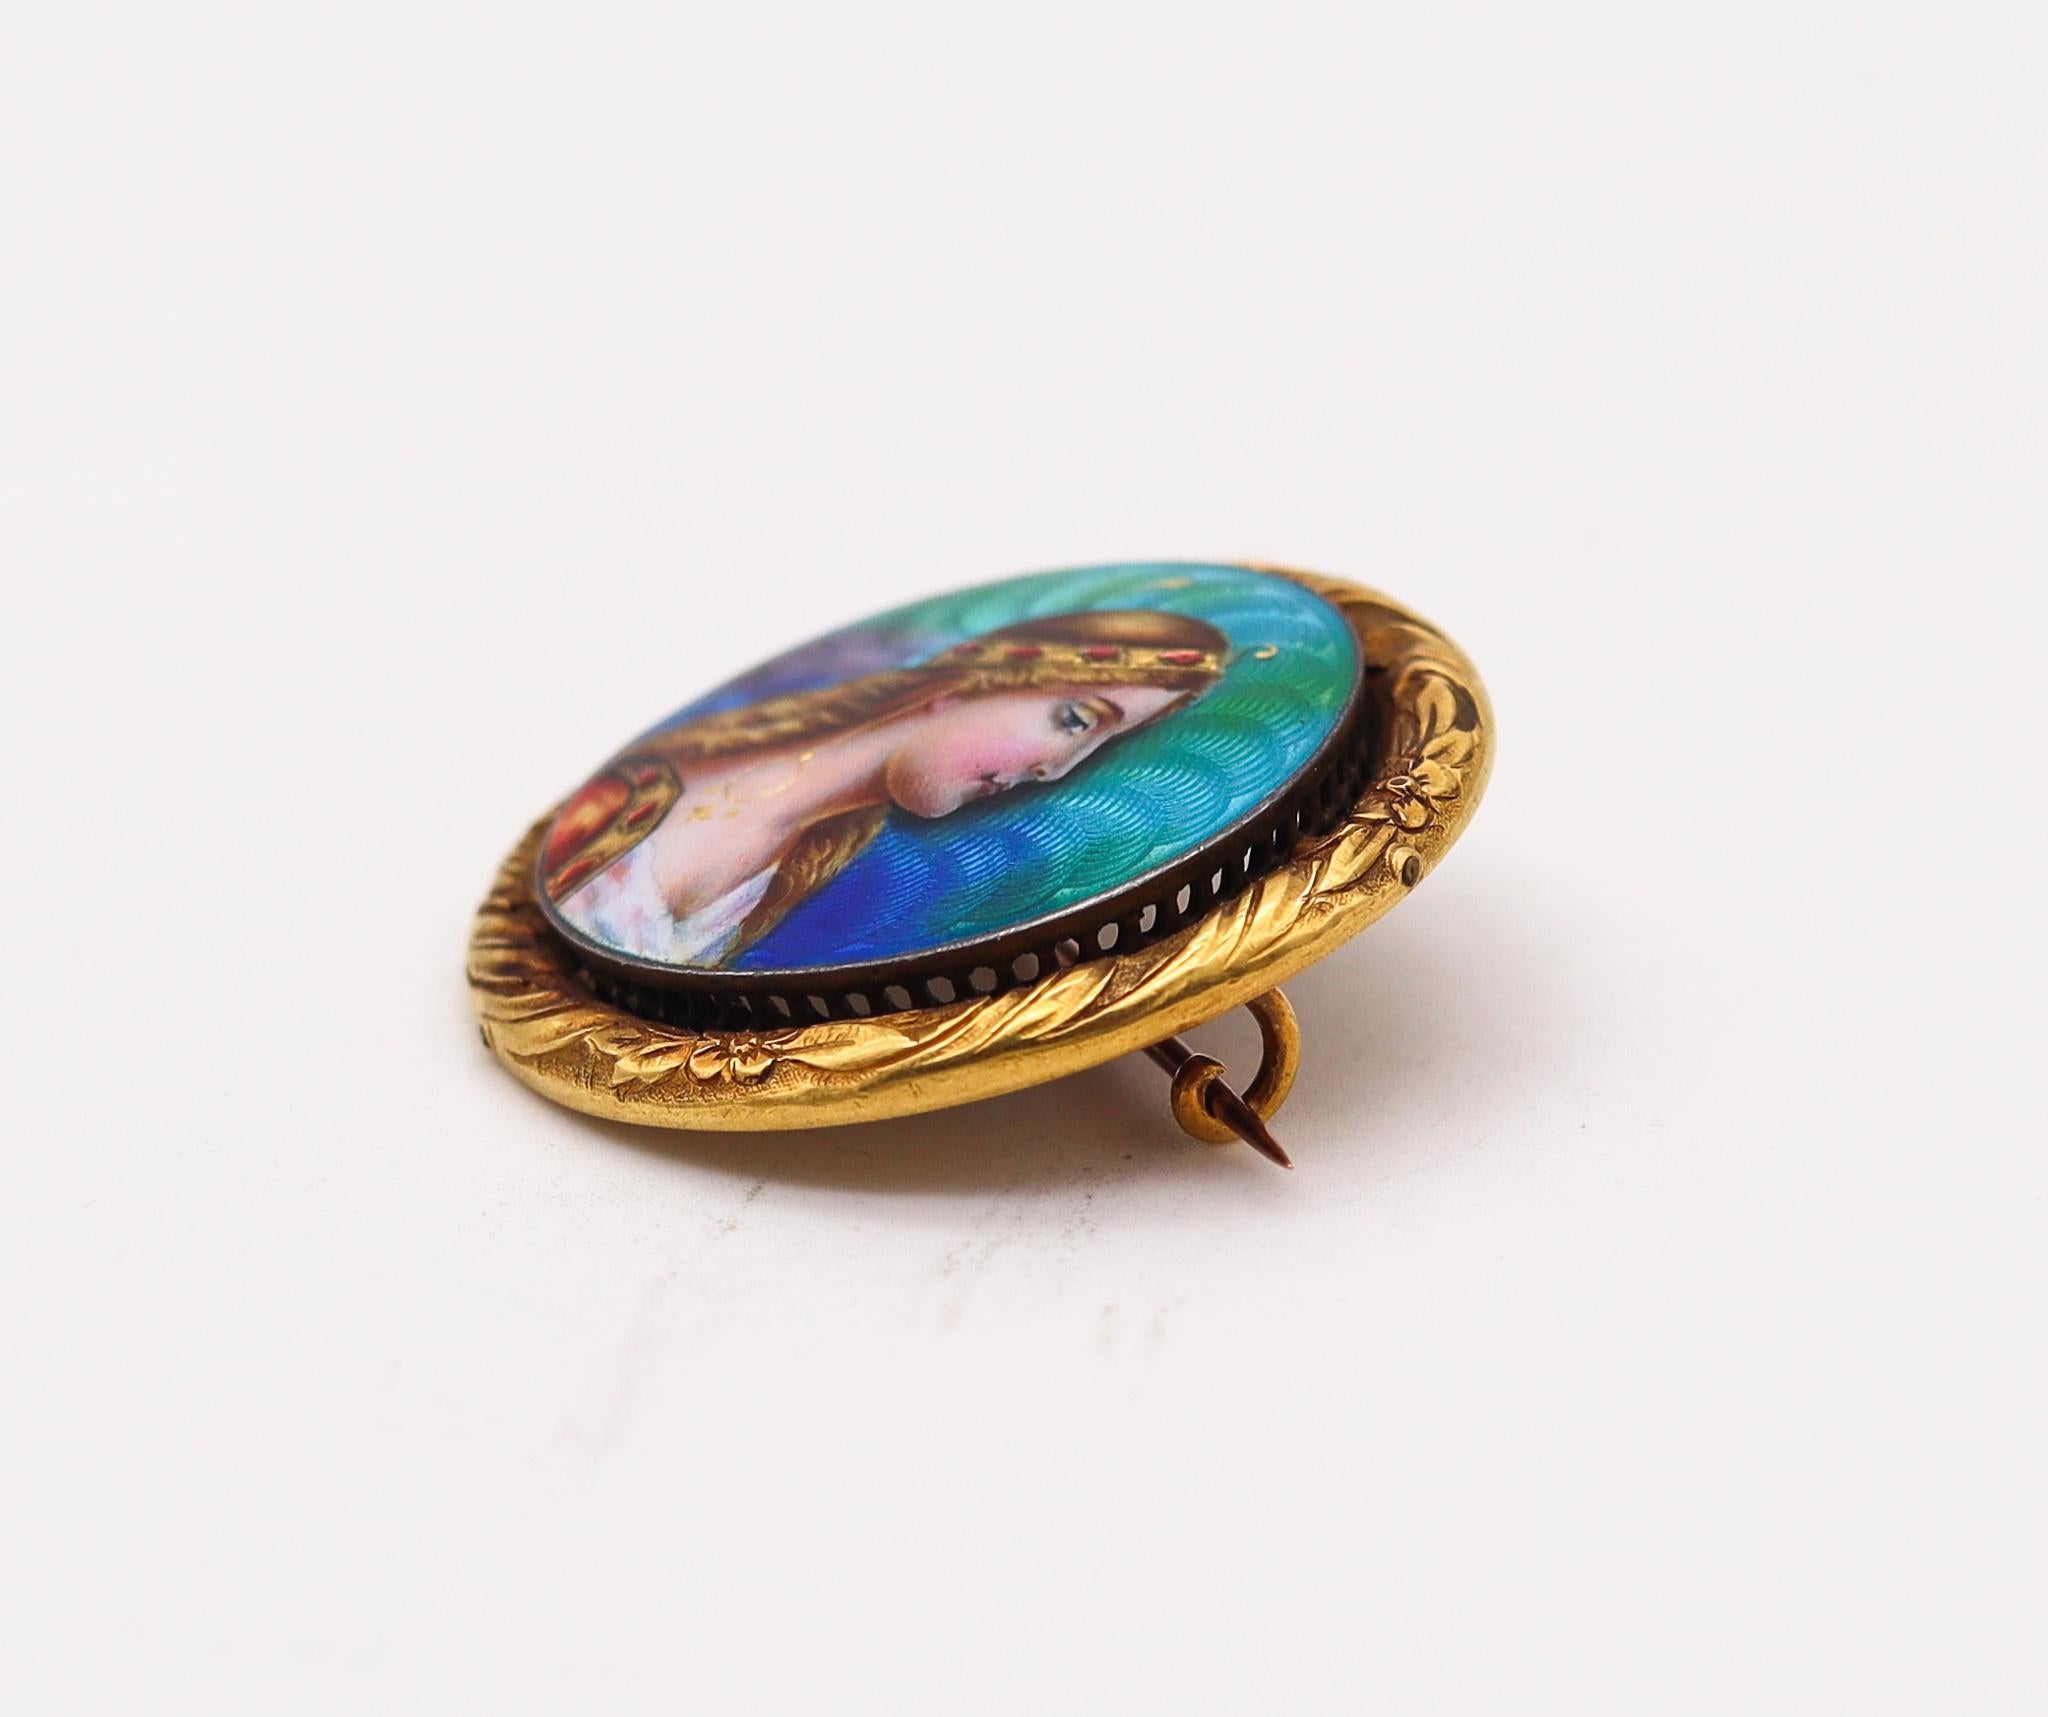 Meyle & Mayer 1895 German Art Nouveau Enameled Brooch with Diana in 18Kt Gold  In Good Condition For Sale In Miami, FL